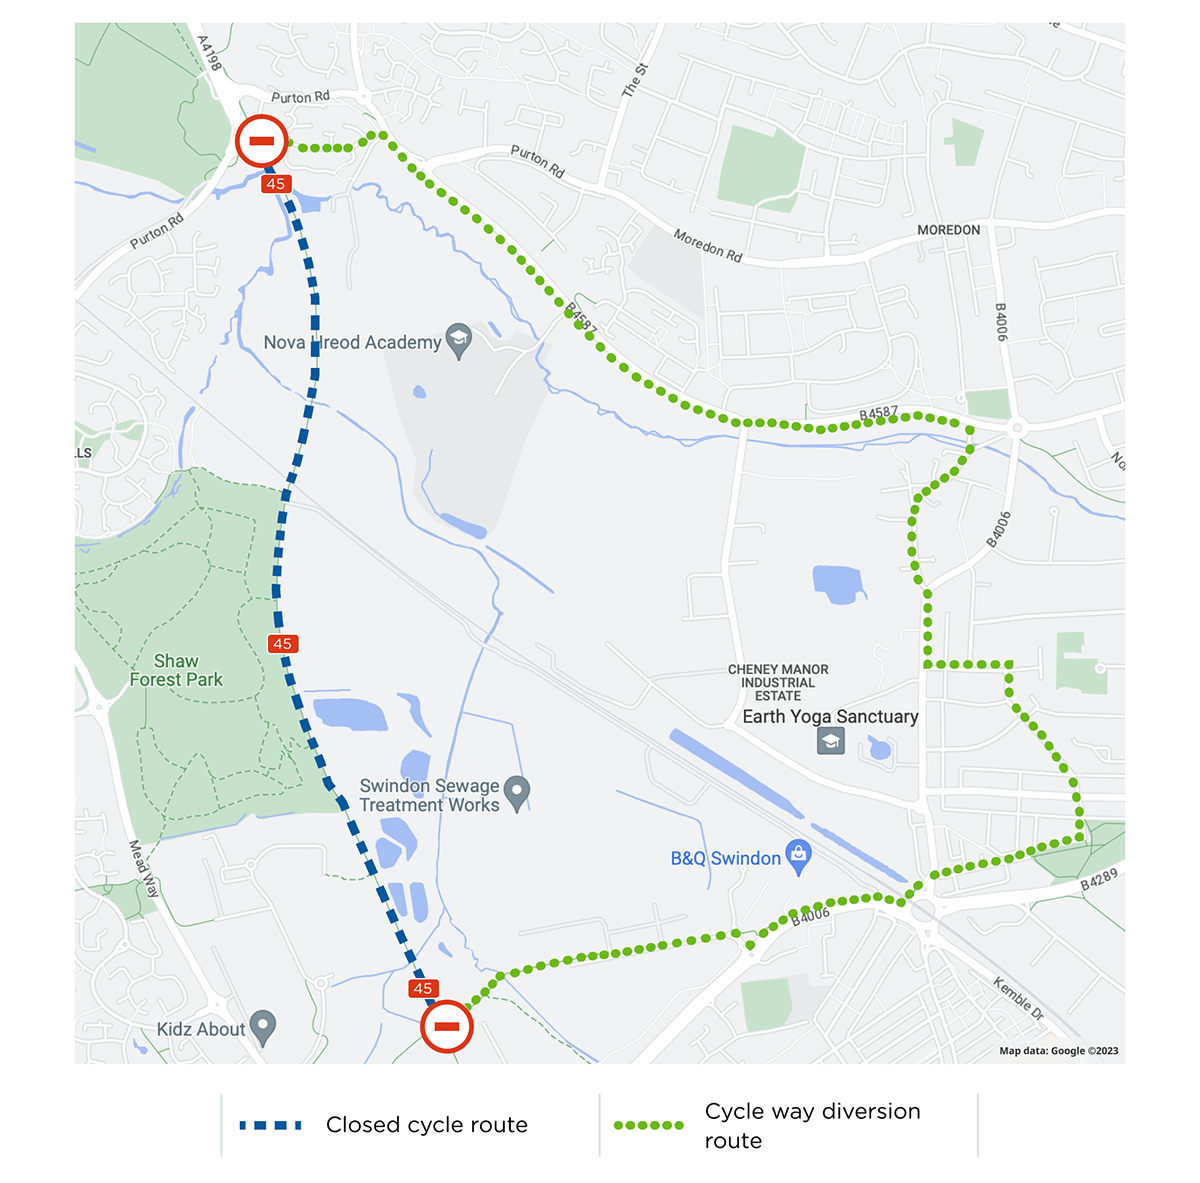 This map shows a diversion cycle route towards Swindon